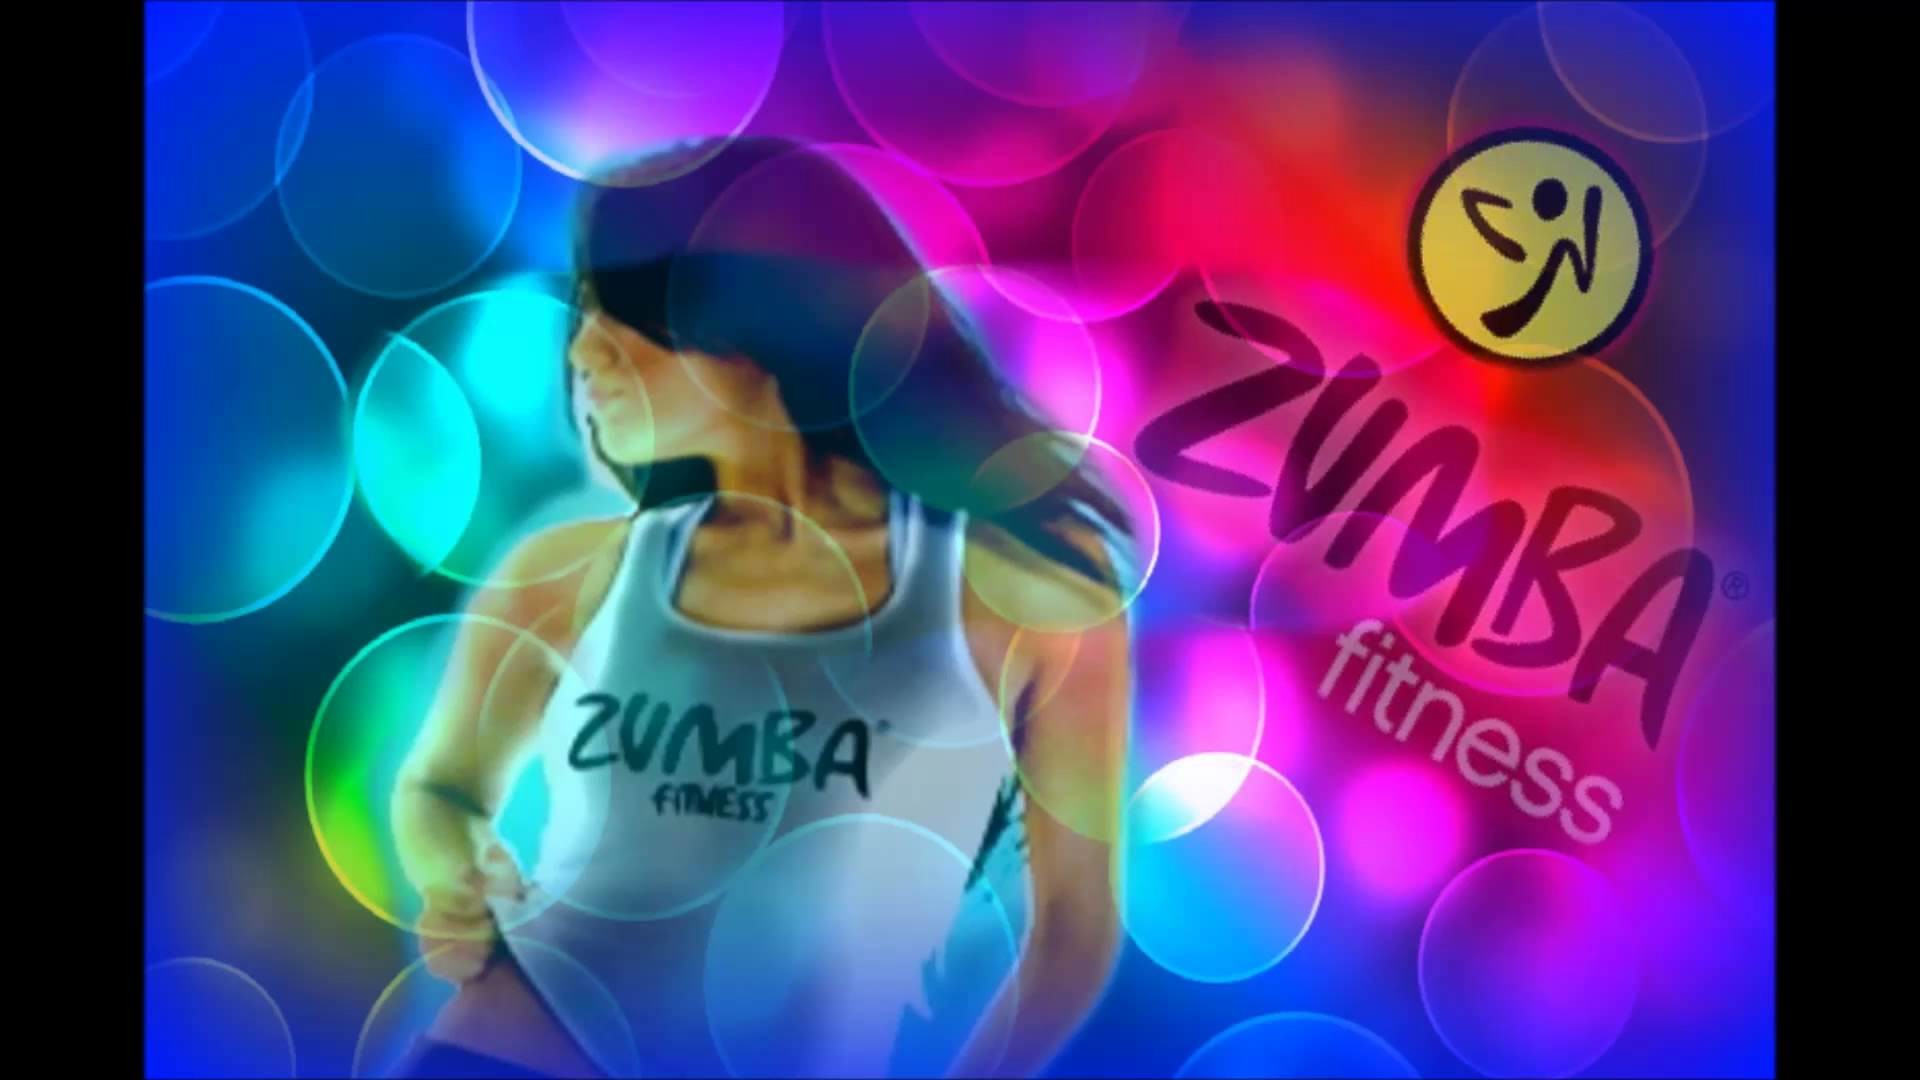 Zumba Wallpaper Pictures